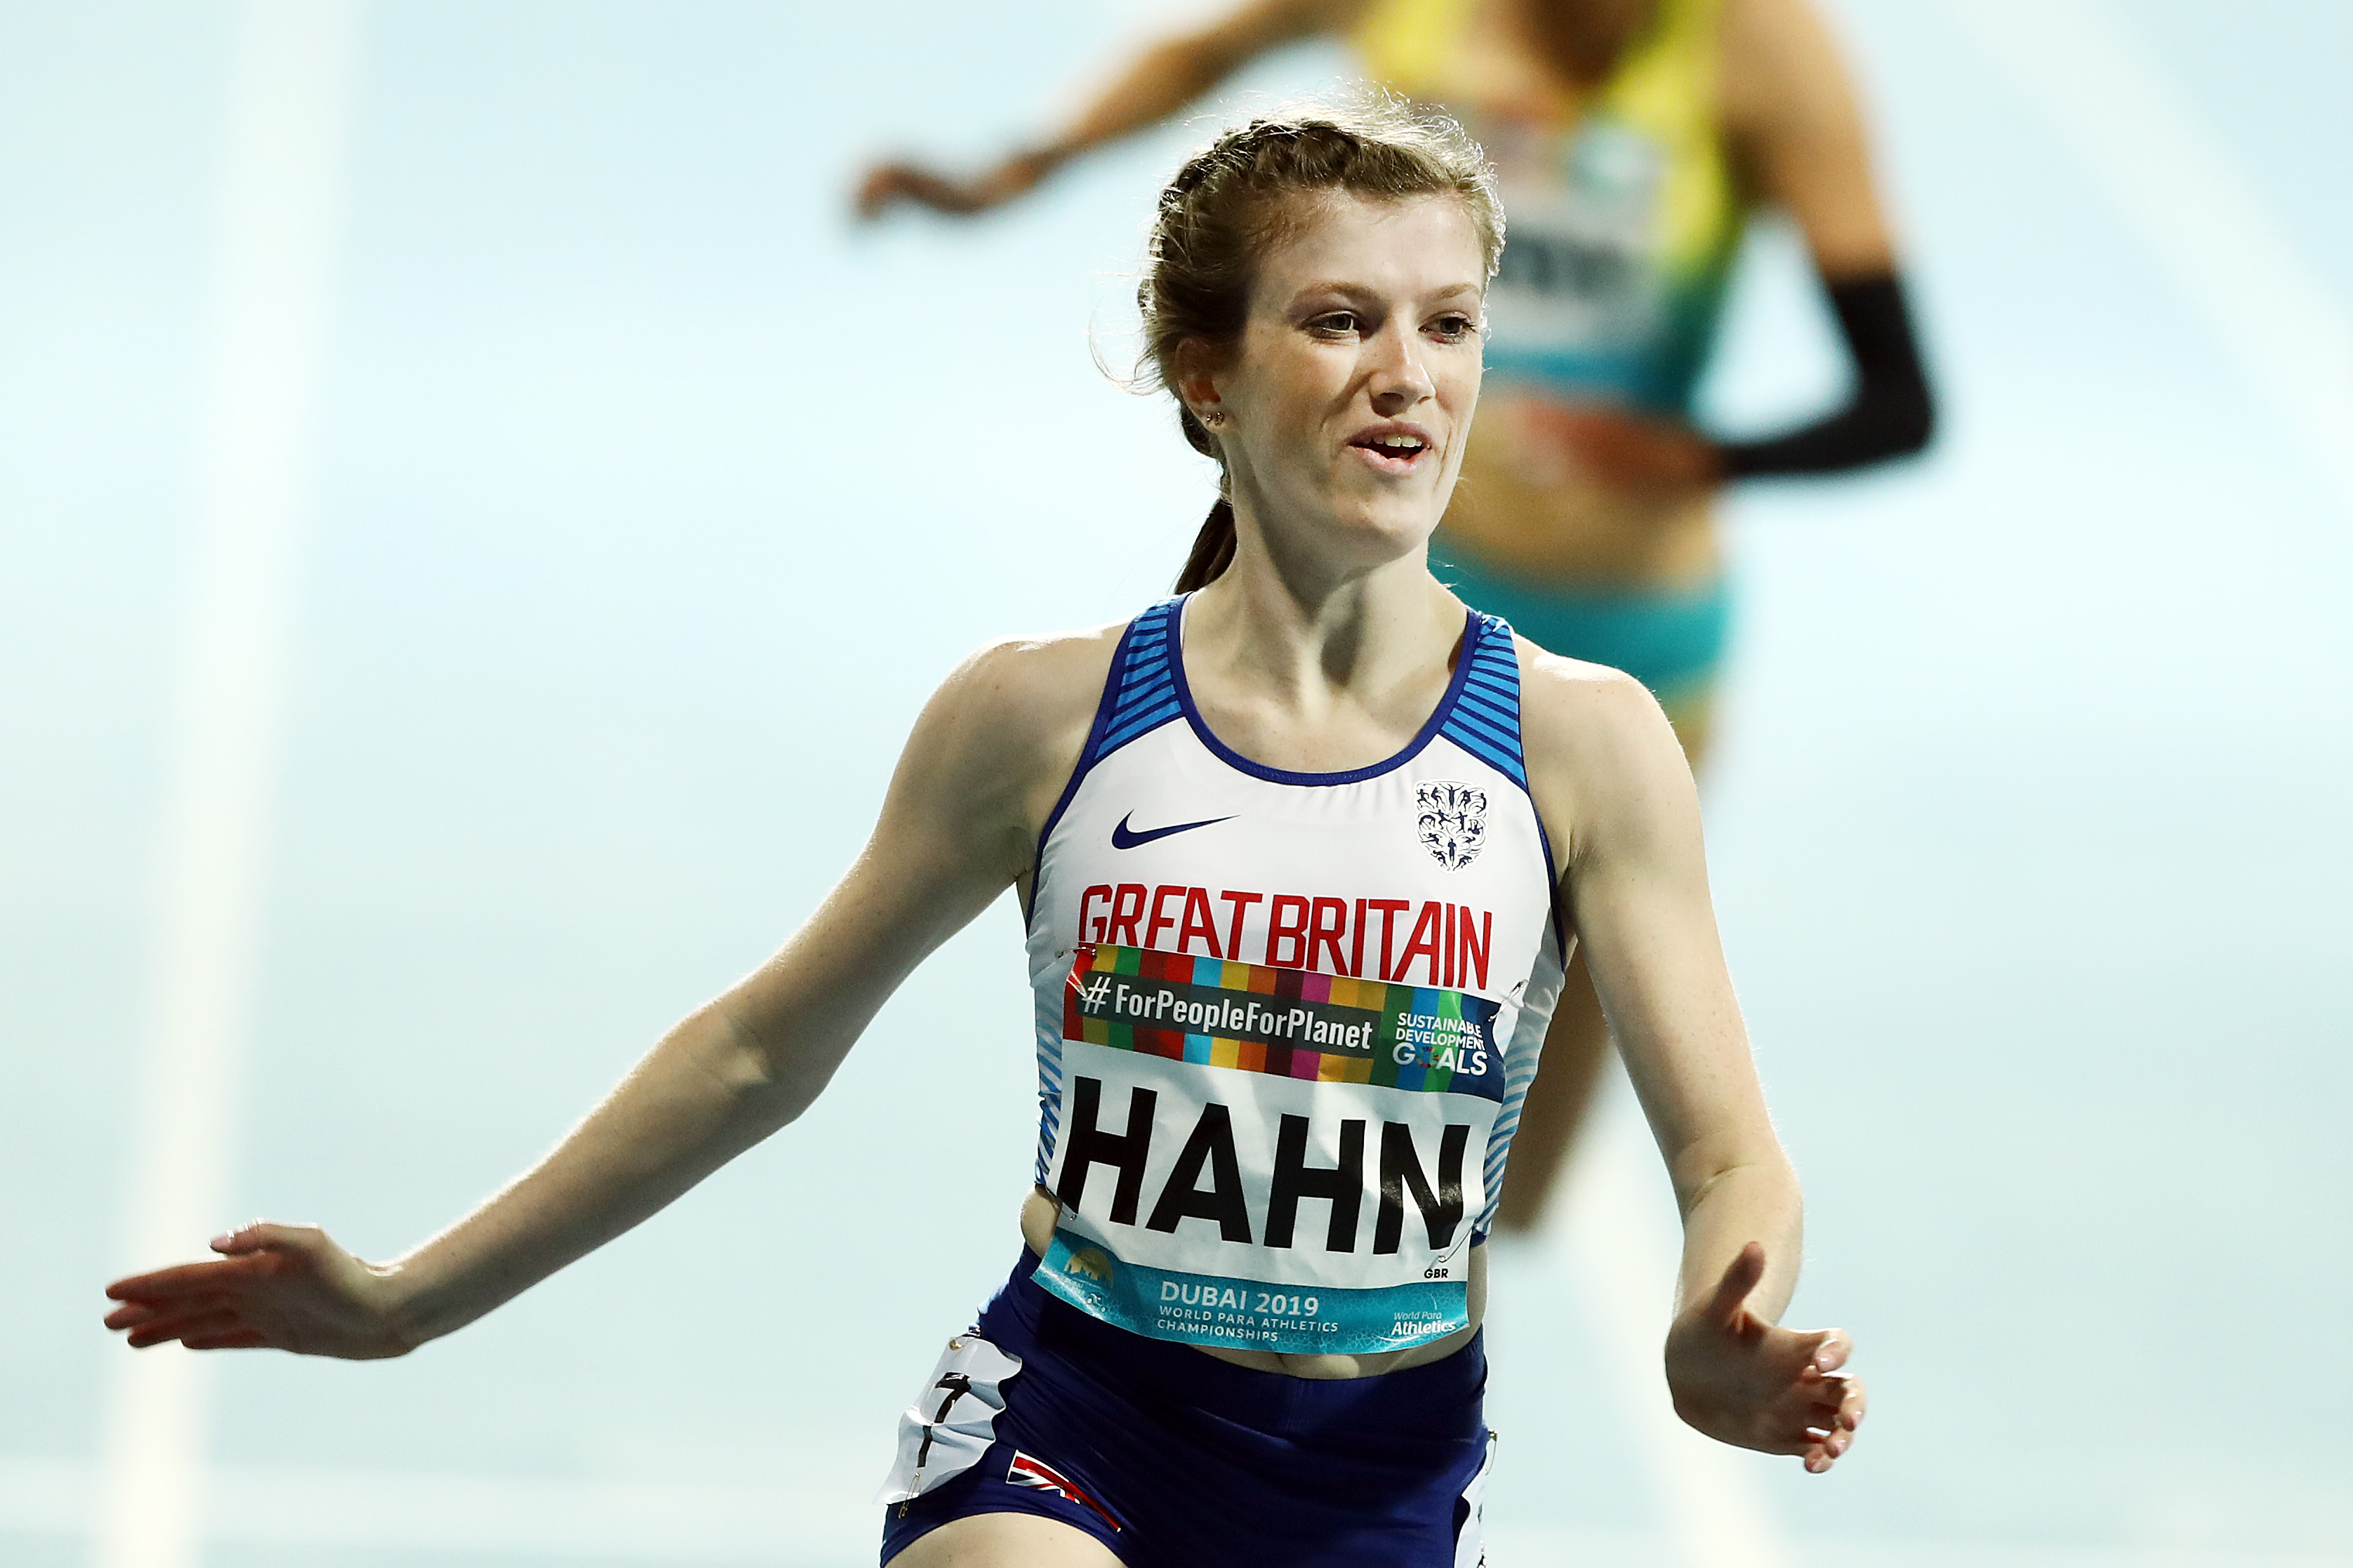 GB & NI PARALYMPIC AND WORLD MEDALLISTS SET FOR MÜLLER BRITISH ATHLETICS CHAMPIONSHIPS